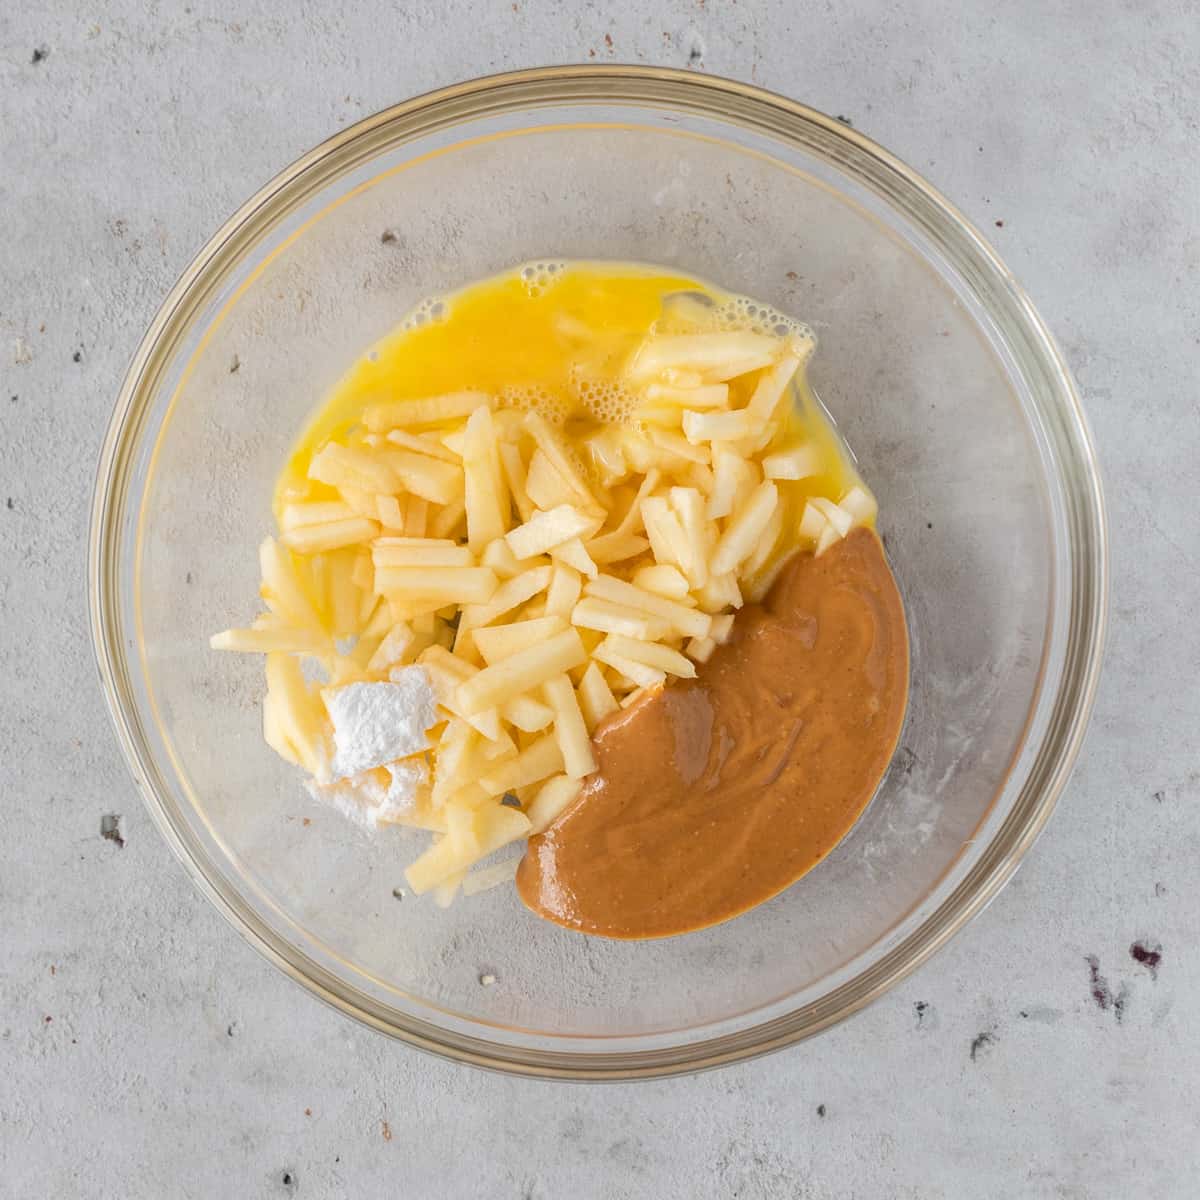 The chopped apple, peanut butter, egg, and baking powder in a glass bowl before being combined